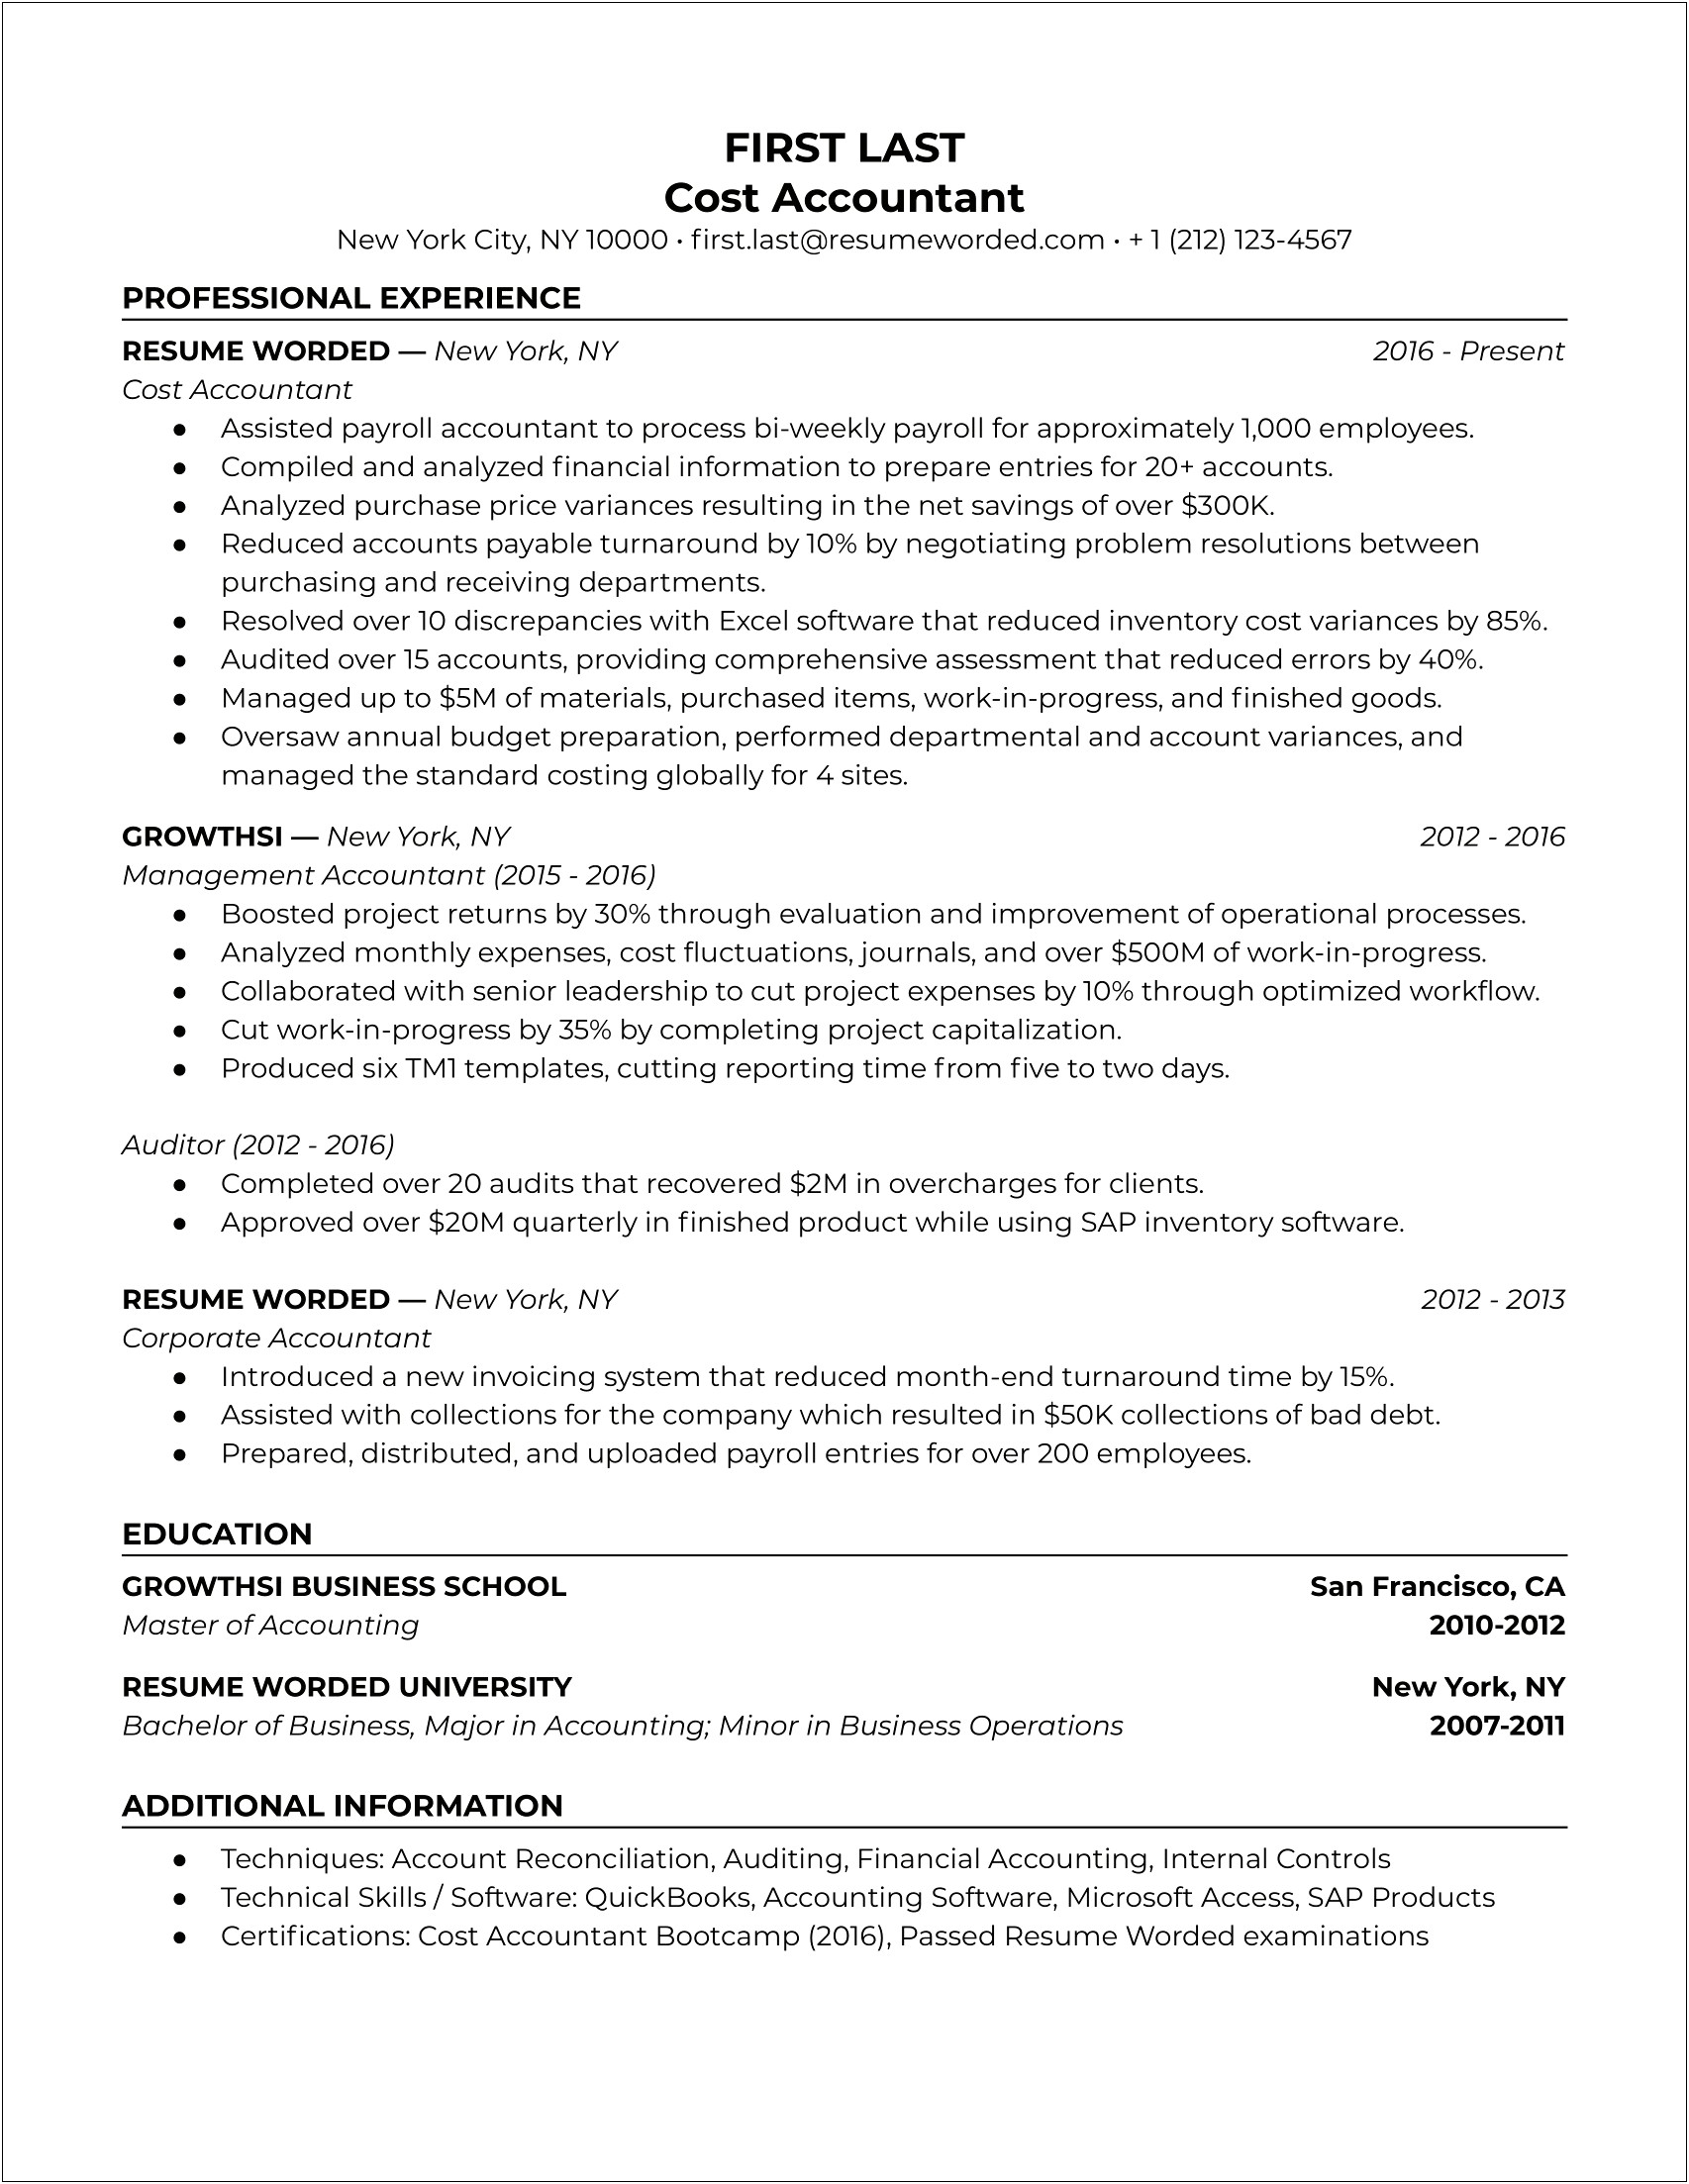 Resume Example For Construction Accountant